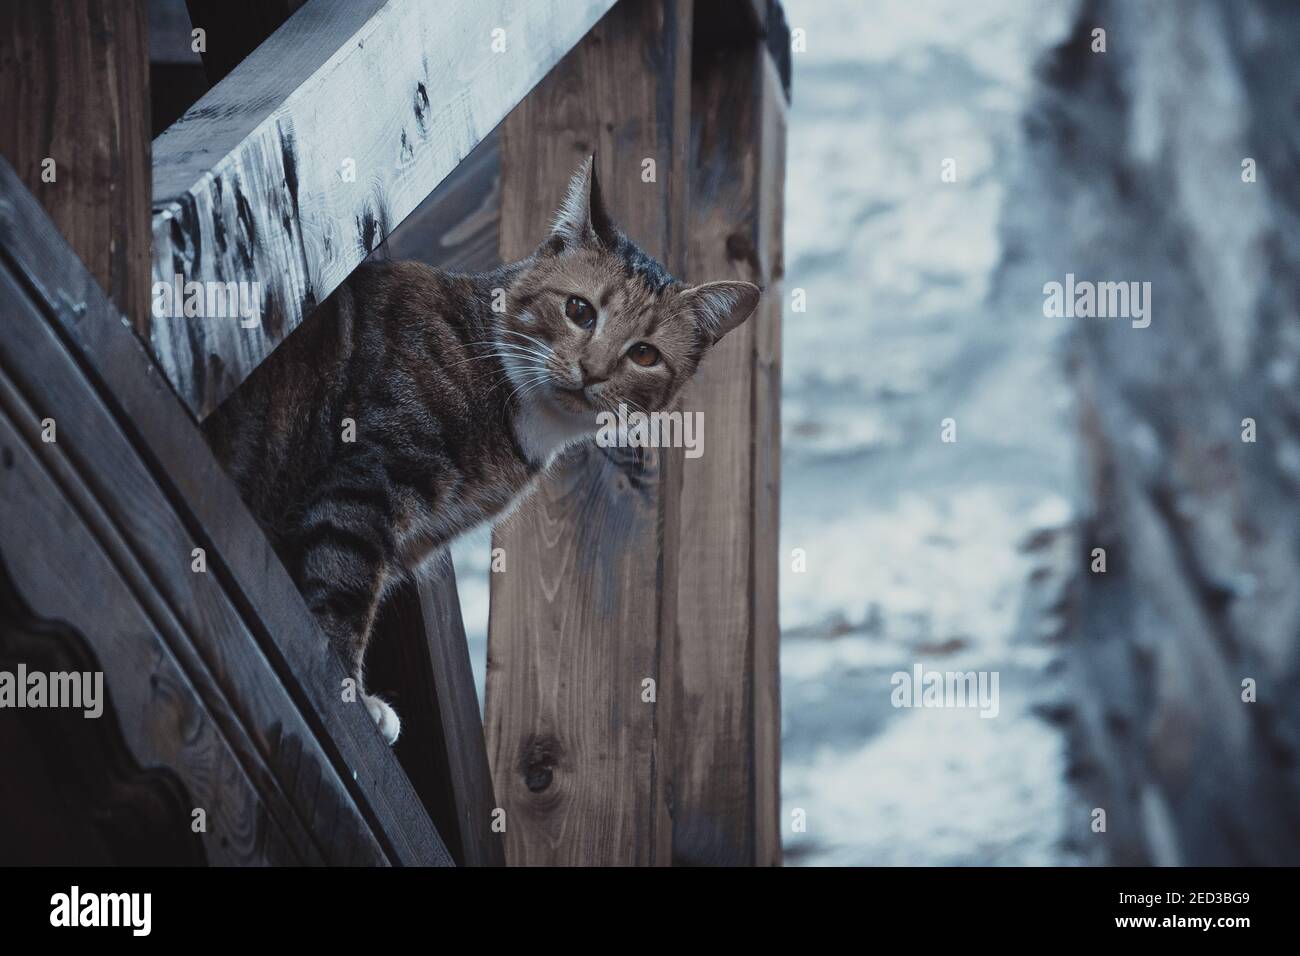 Street cat looking at the camera among the wooden pier Stock Photo